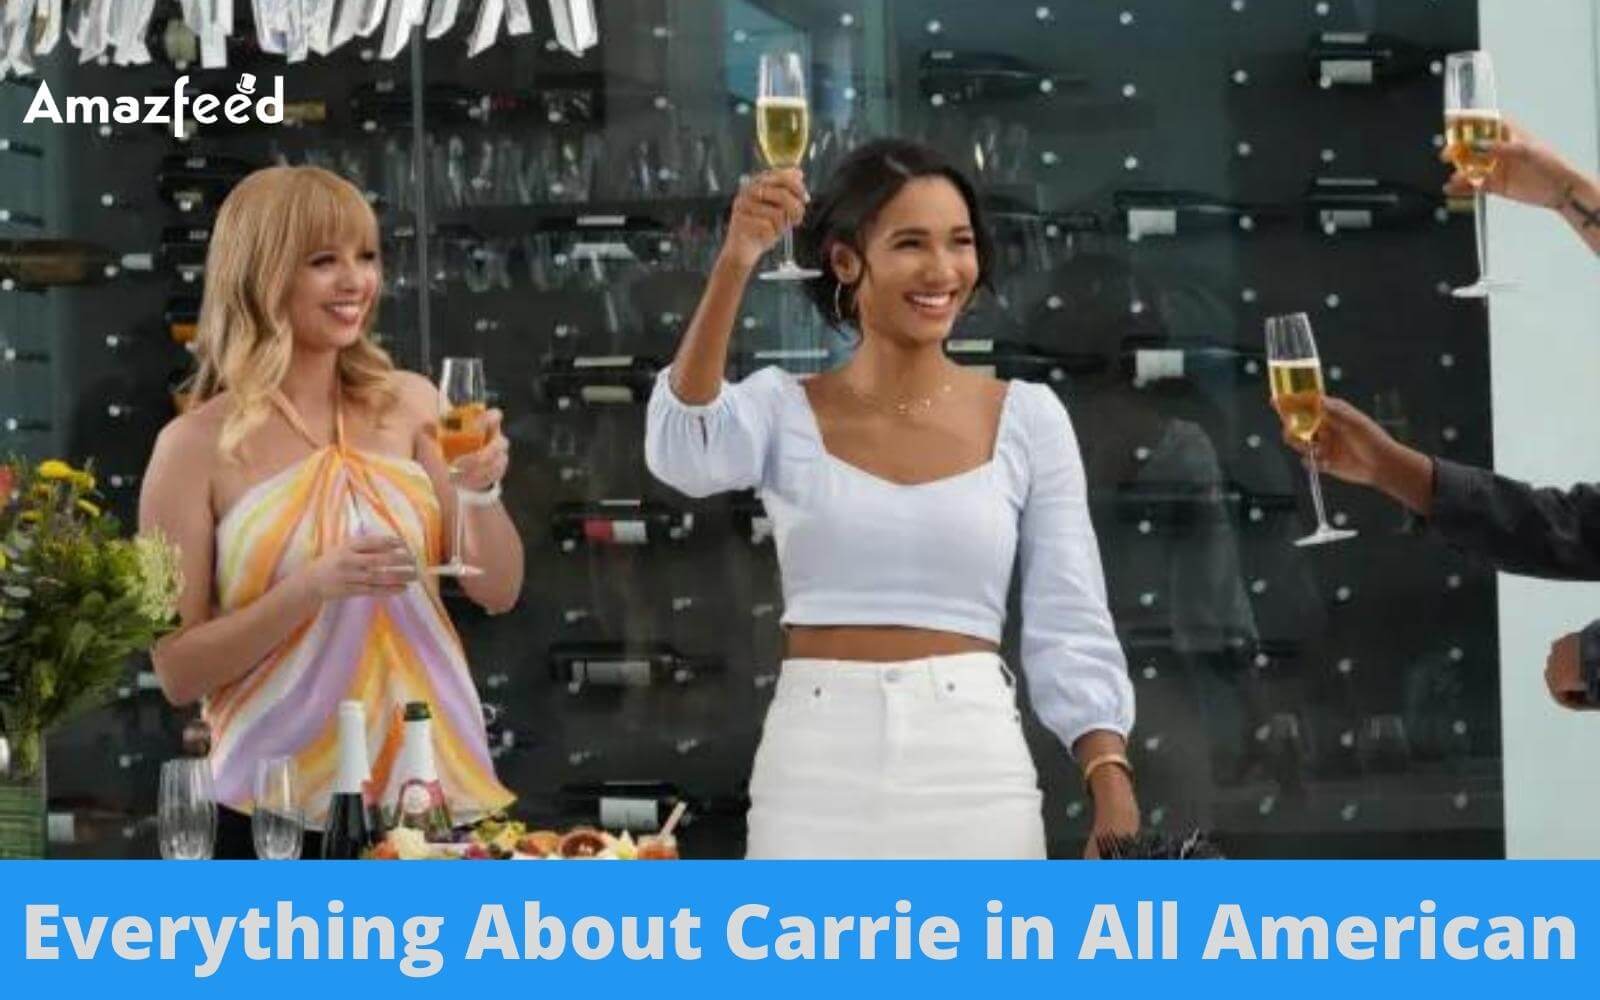 Everything About Carrie in All American